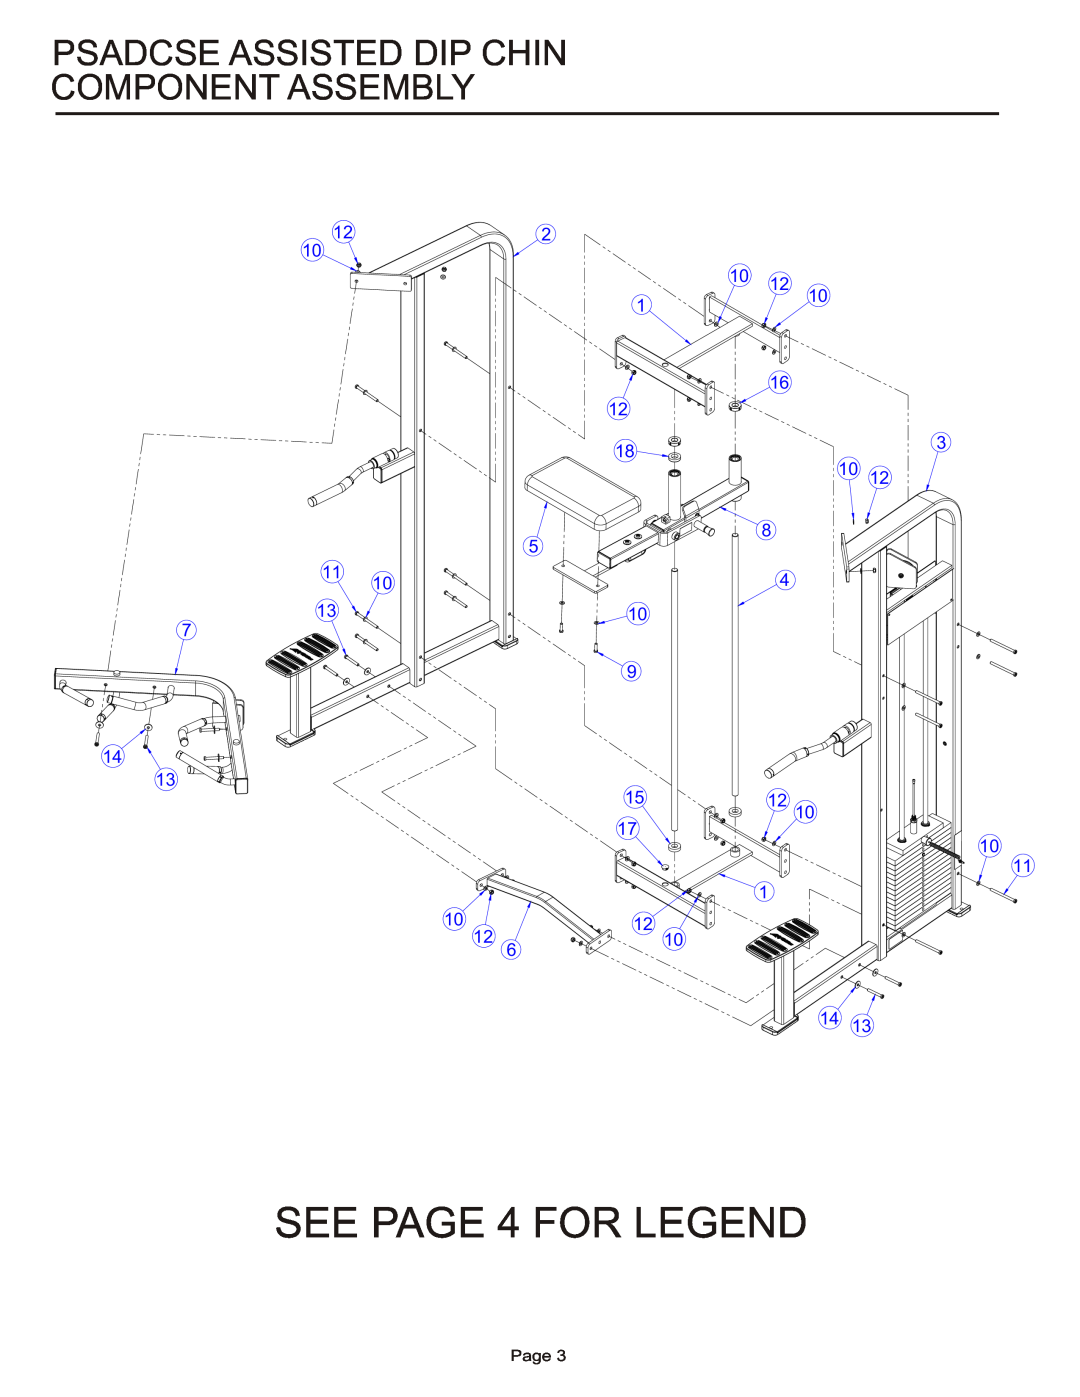 Life Fitness PSADCSE manual SEE PAGE 4 FOR LEGEND, Psadcse Assisted Dip Chin Component Assembly, Page 